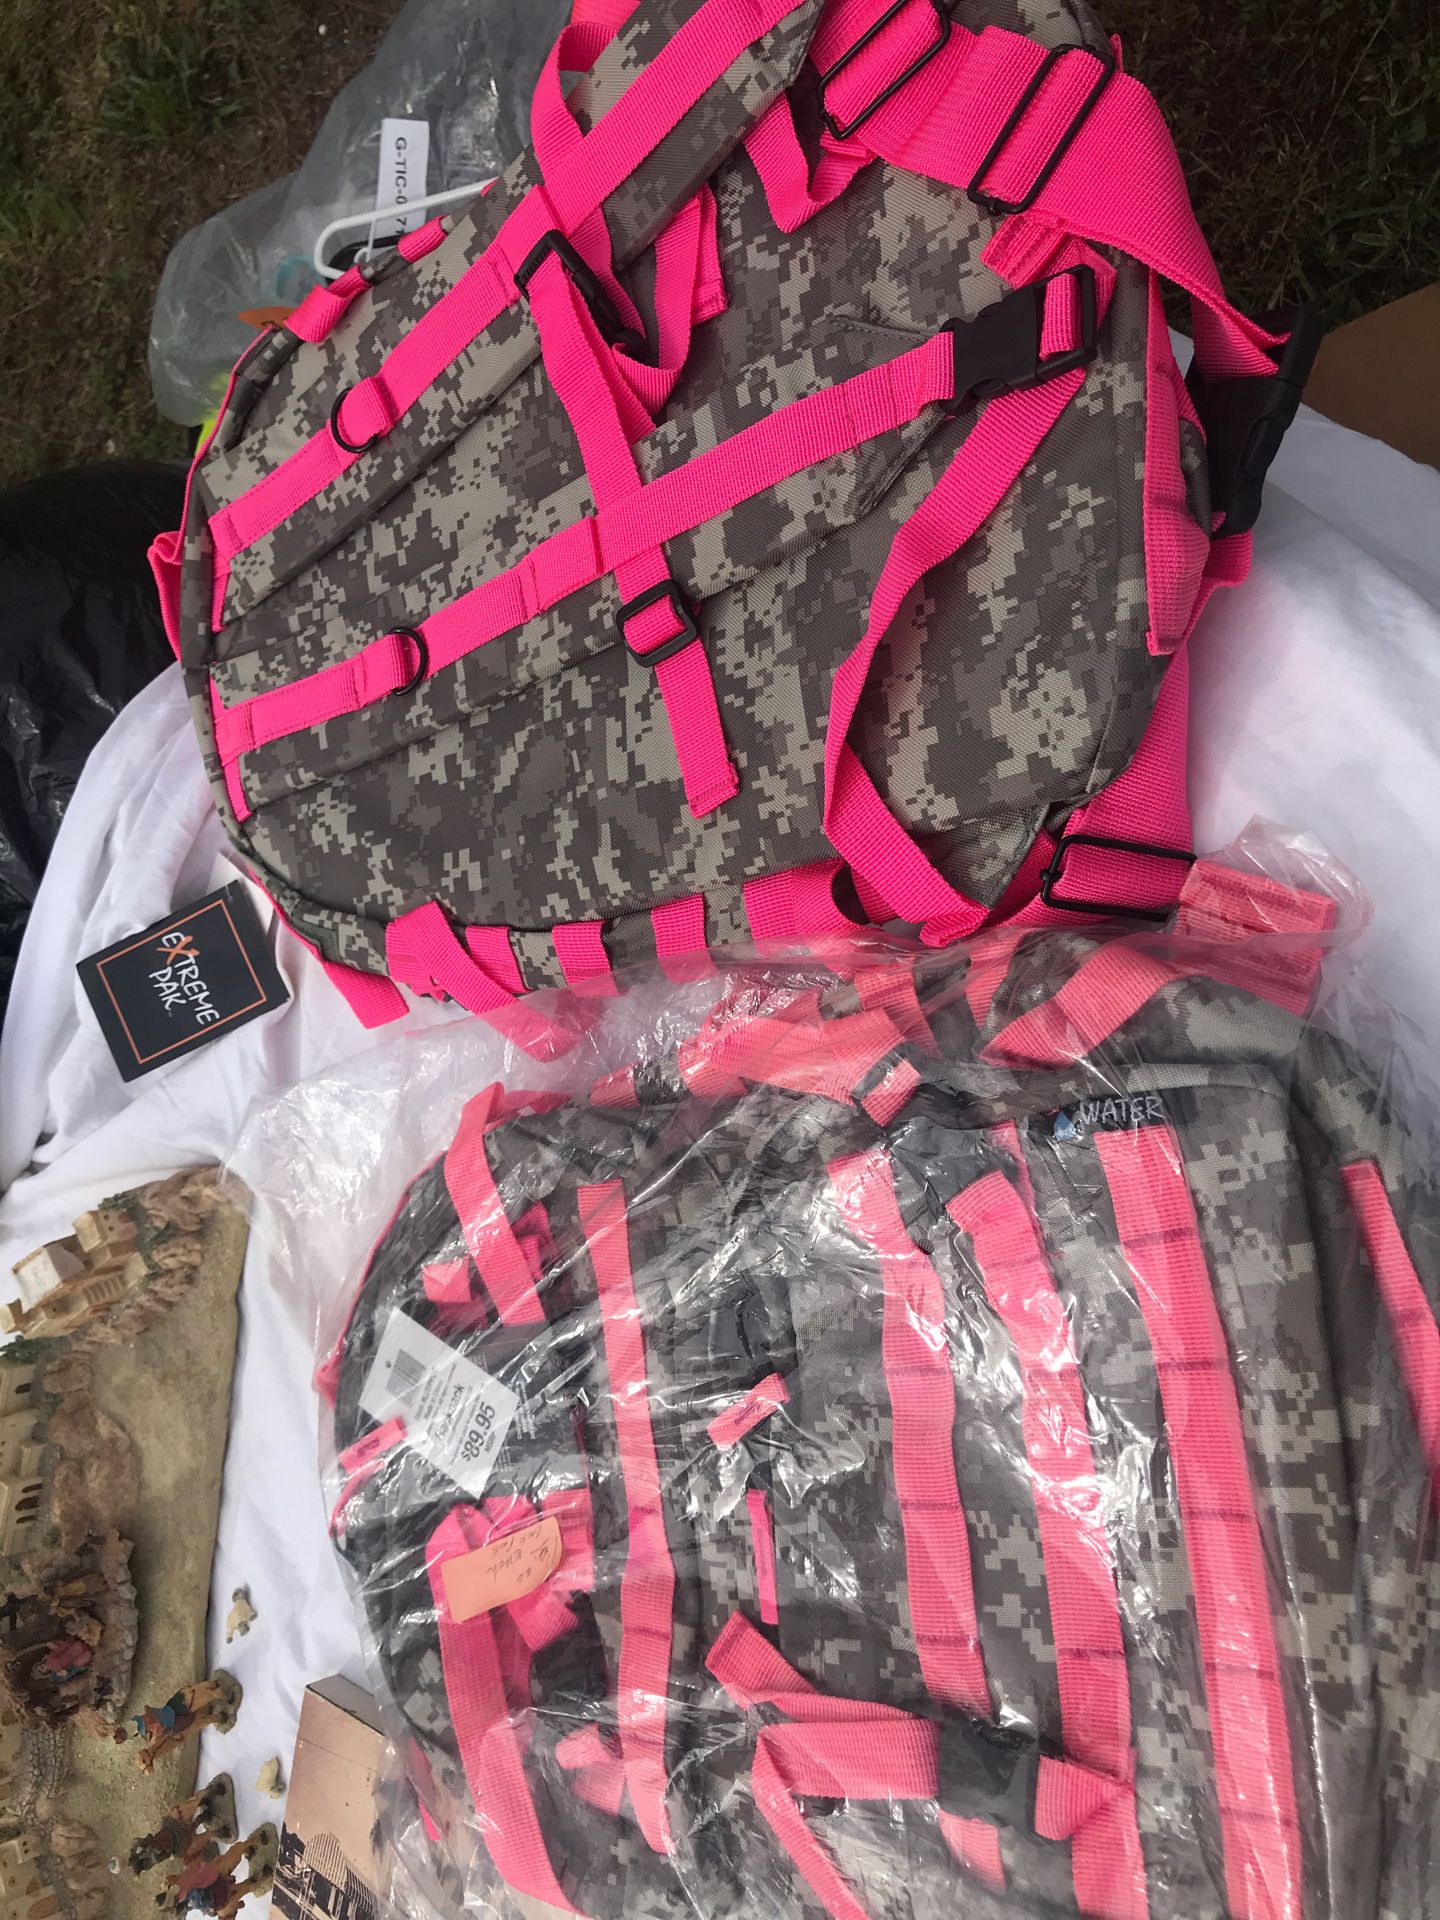 Two backpacks brand new camouflage and pink